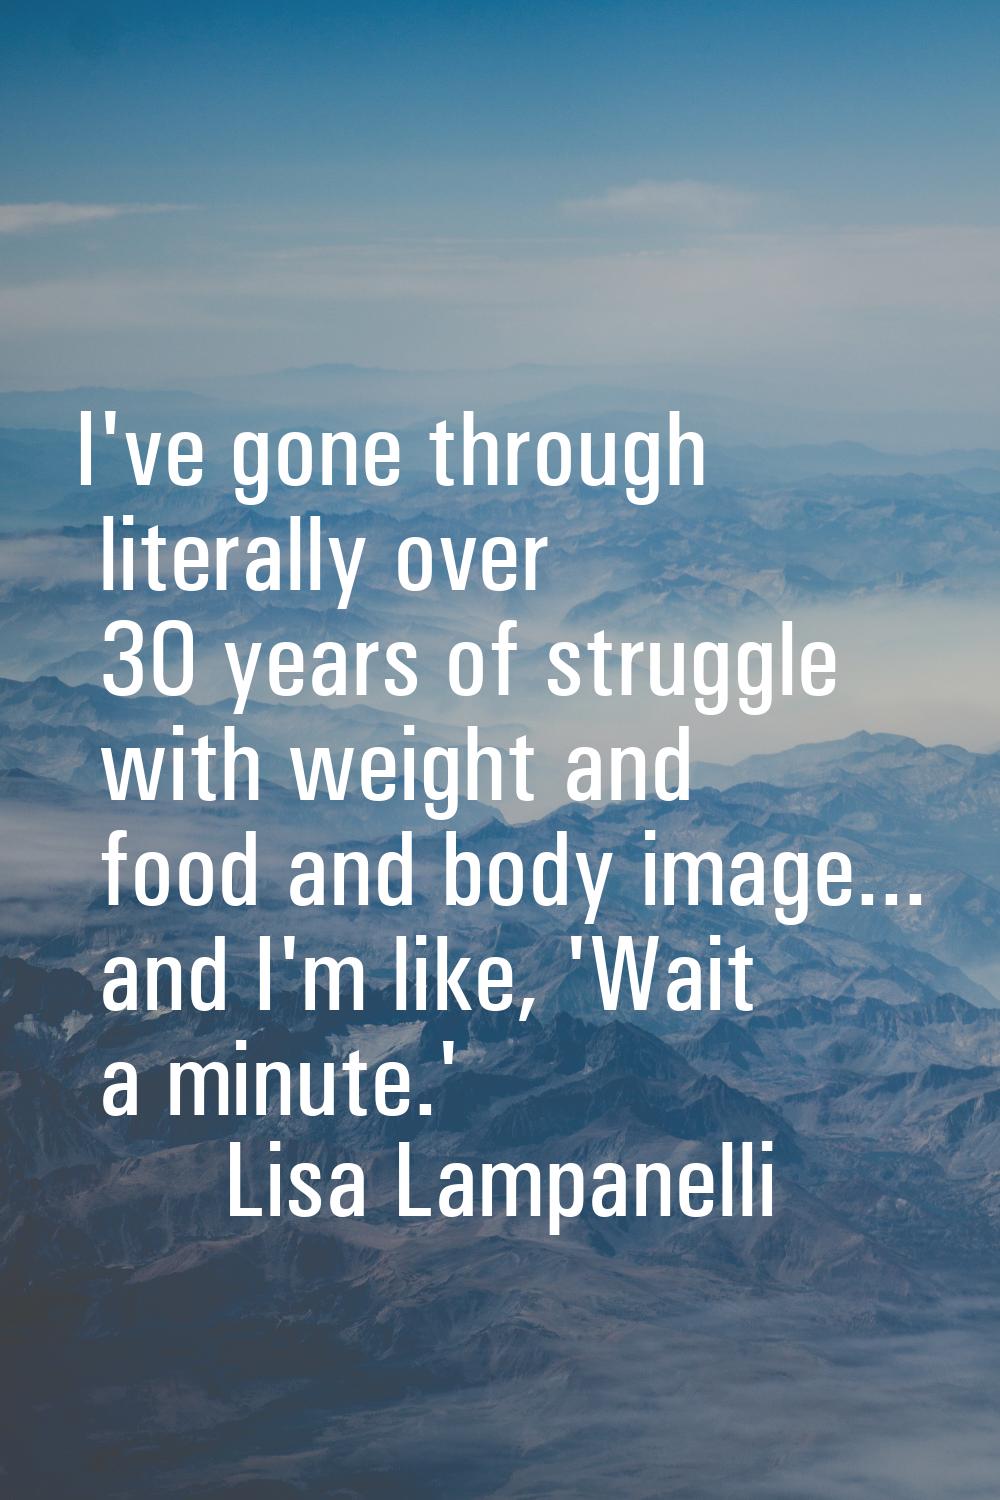 I've gone through literally over 30 years of struggle with weight and food and body image... and I'